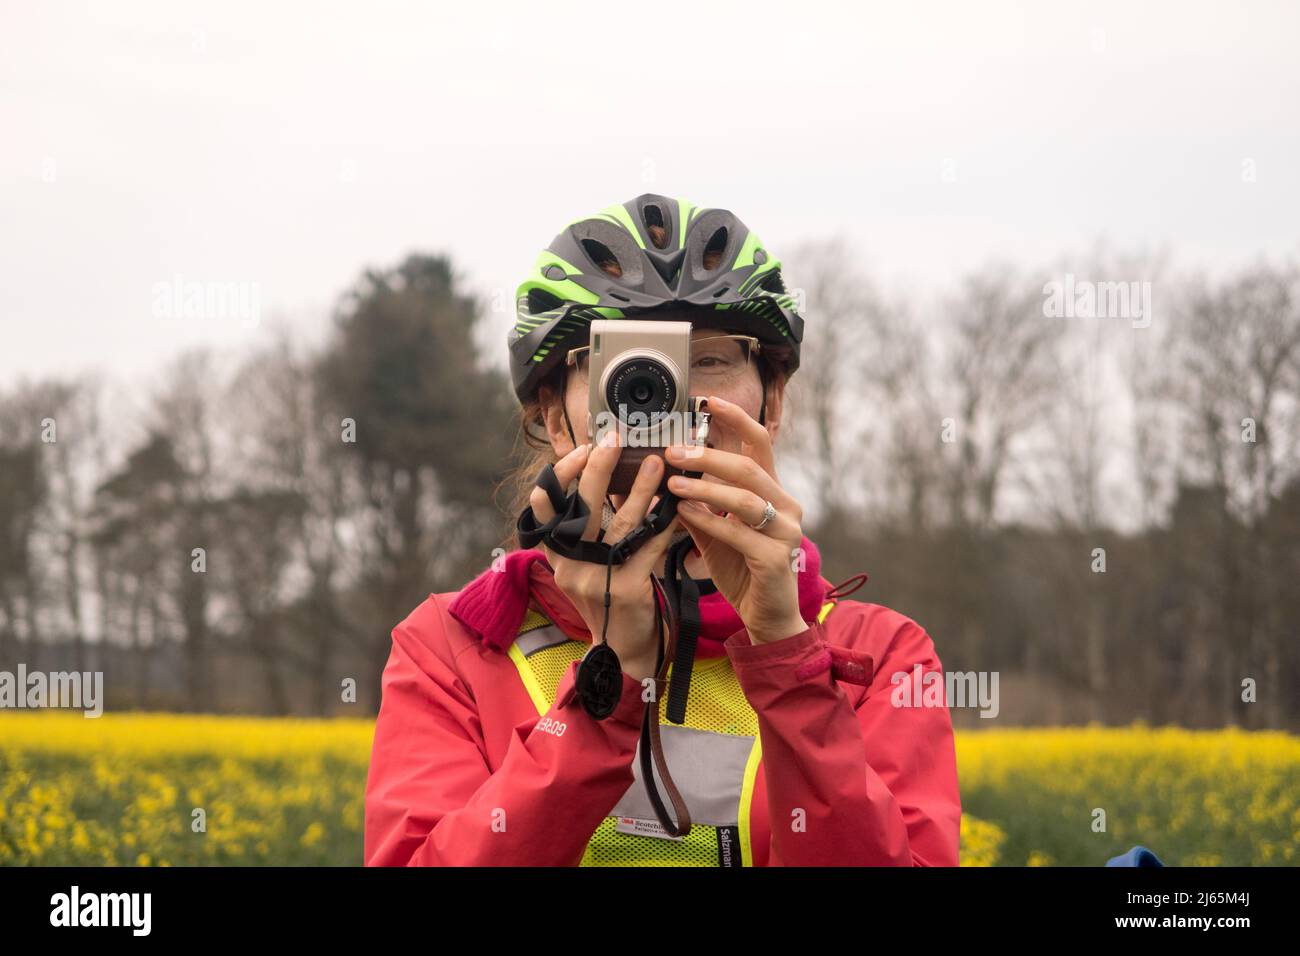 A woman cyclist taking a picture Stock Photo